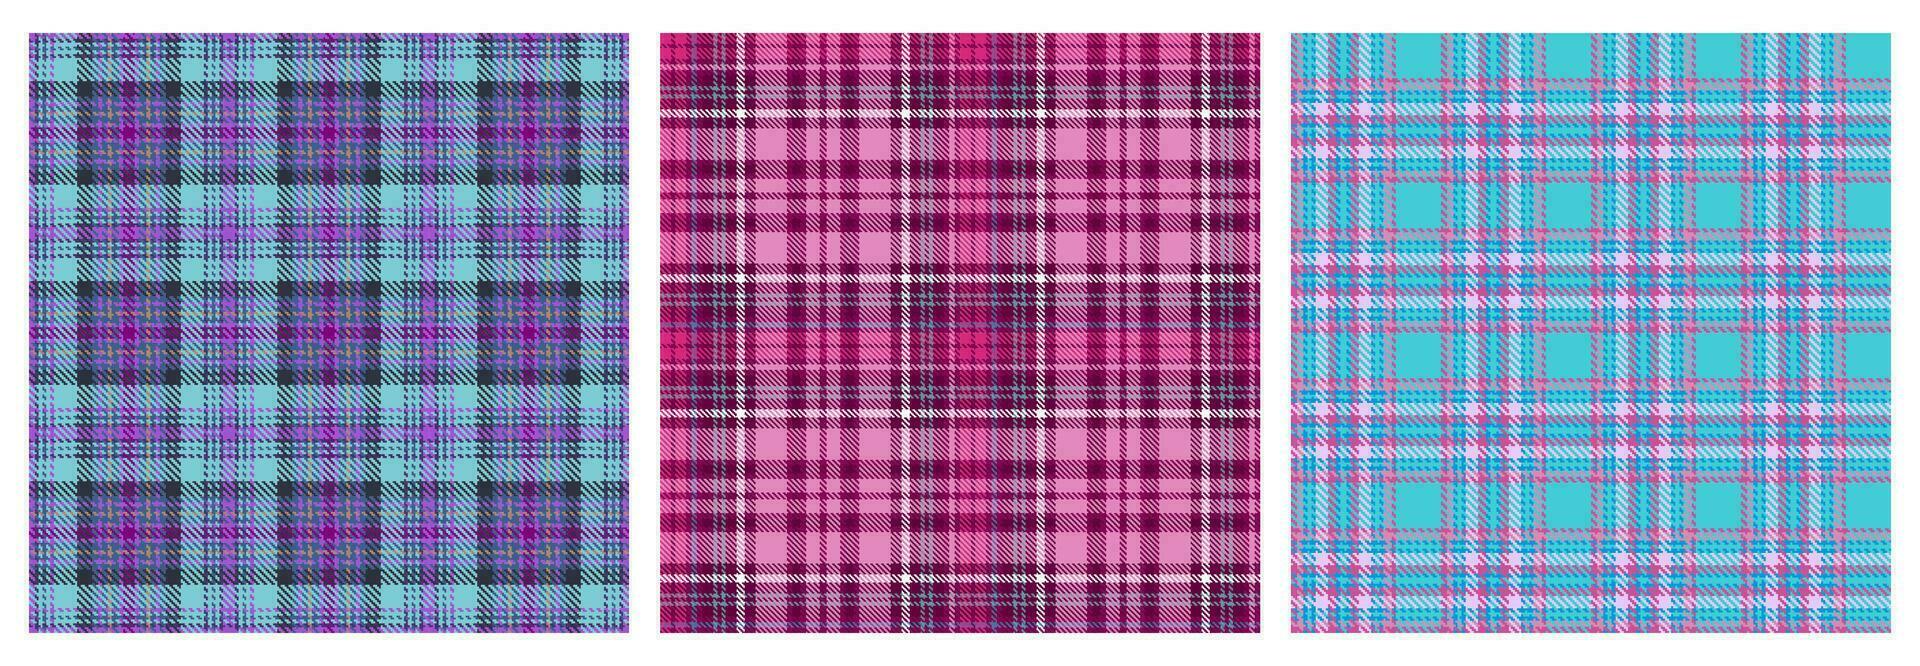 Tartan check plaid texture seamless pattern in pink, blue,green, yellow, white Modern print in barbie ken style for fashion, home decor and stationary Scottish vichy texture Vector illustration